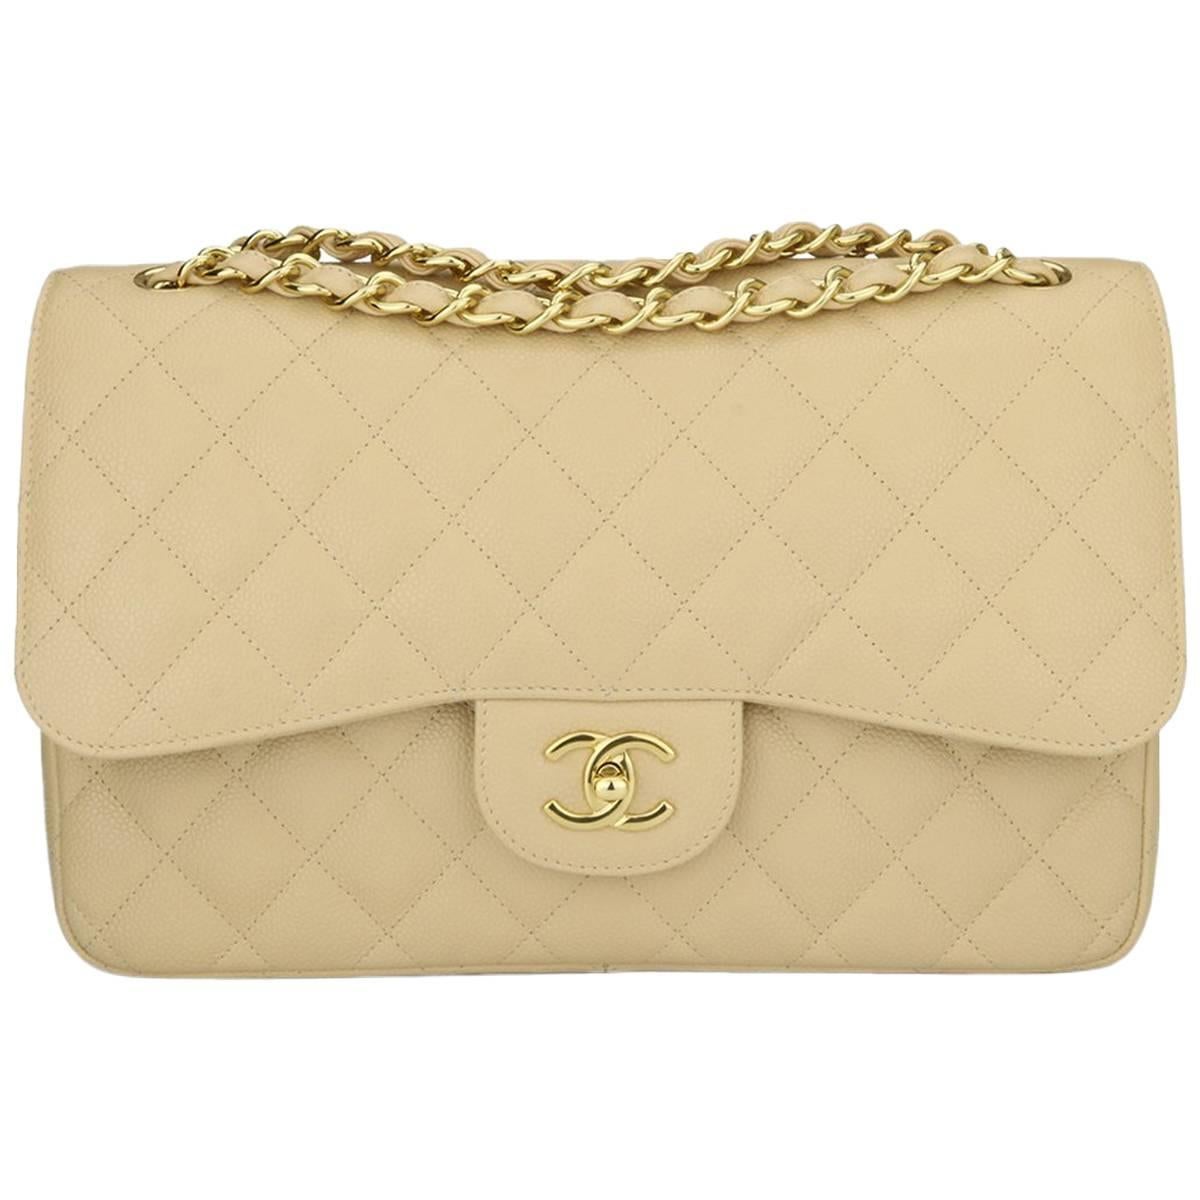 Chanel Jumbo Double Flap Beige Clair Caviar with Gold Hardware, 2012